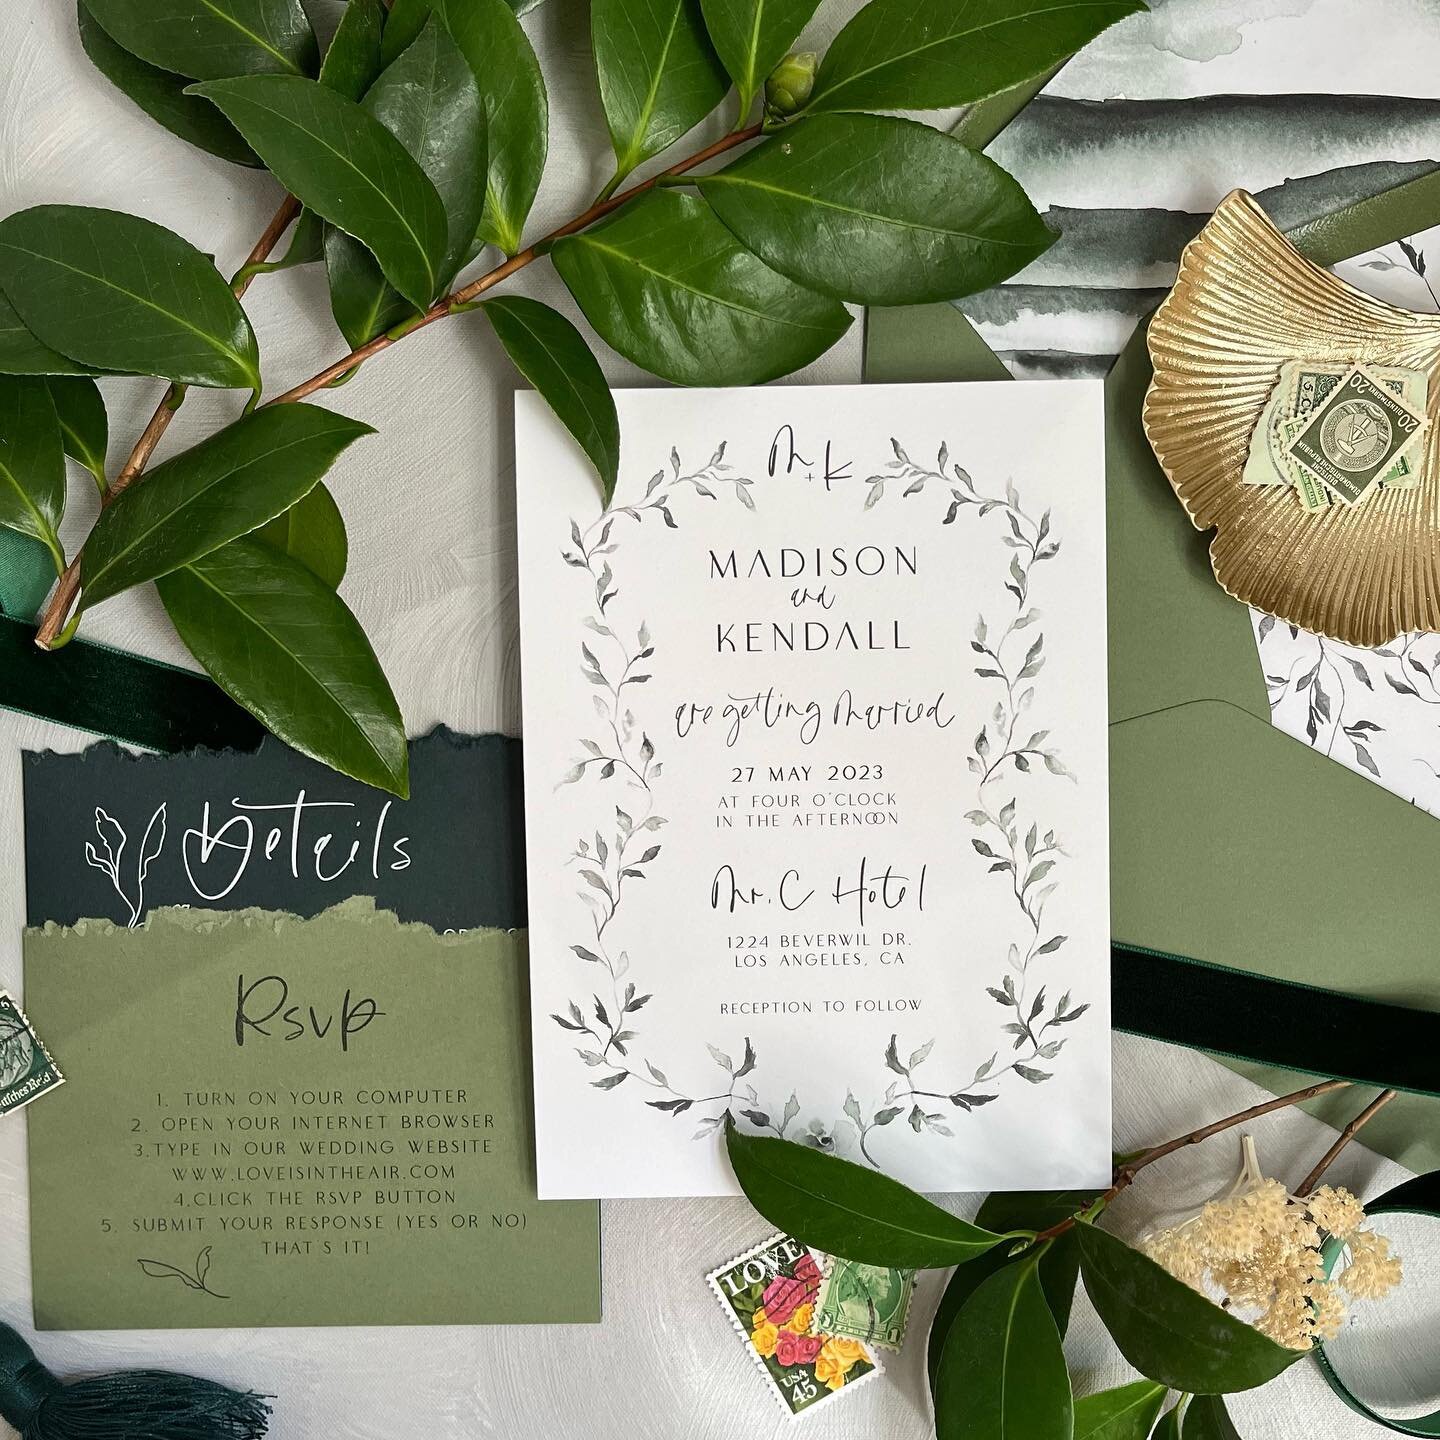 A greenery semi-custom invitation suite inspired off of my own wedding invite.

Coming soon.

What is a semi custom wedding invitation?
A pre designed and unique invite with select customizations. Like your information. Hand-lettered elements like yo